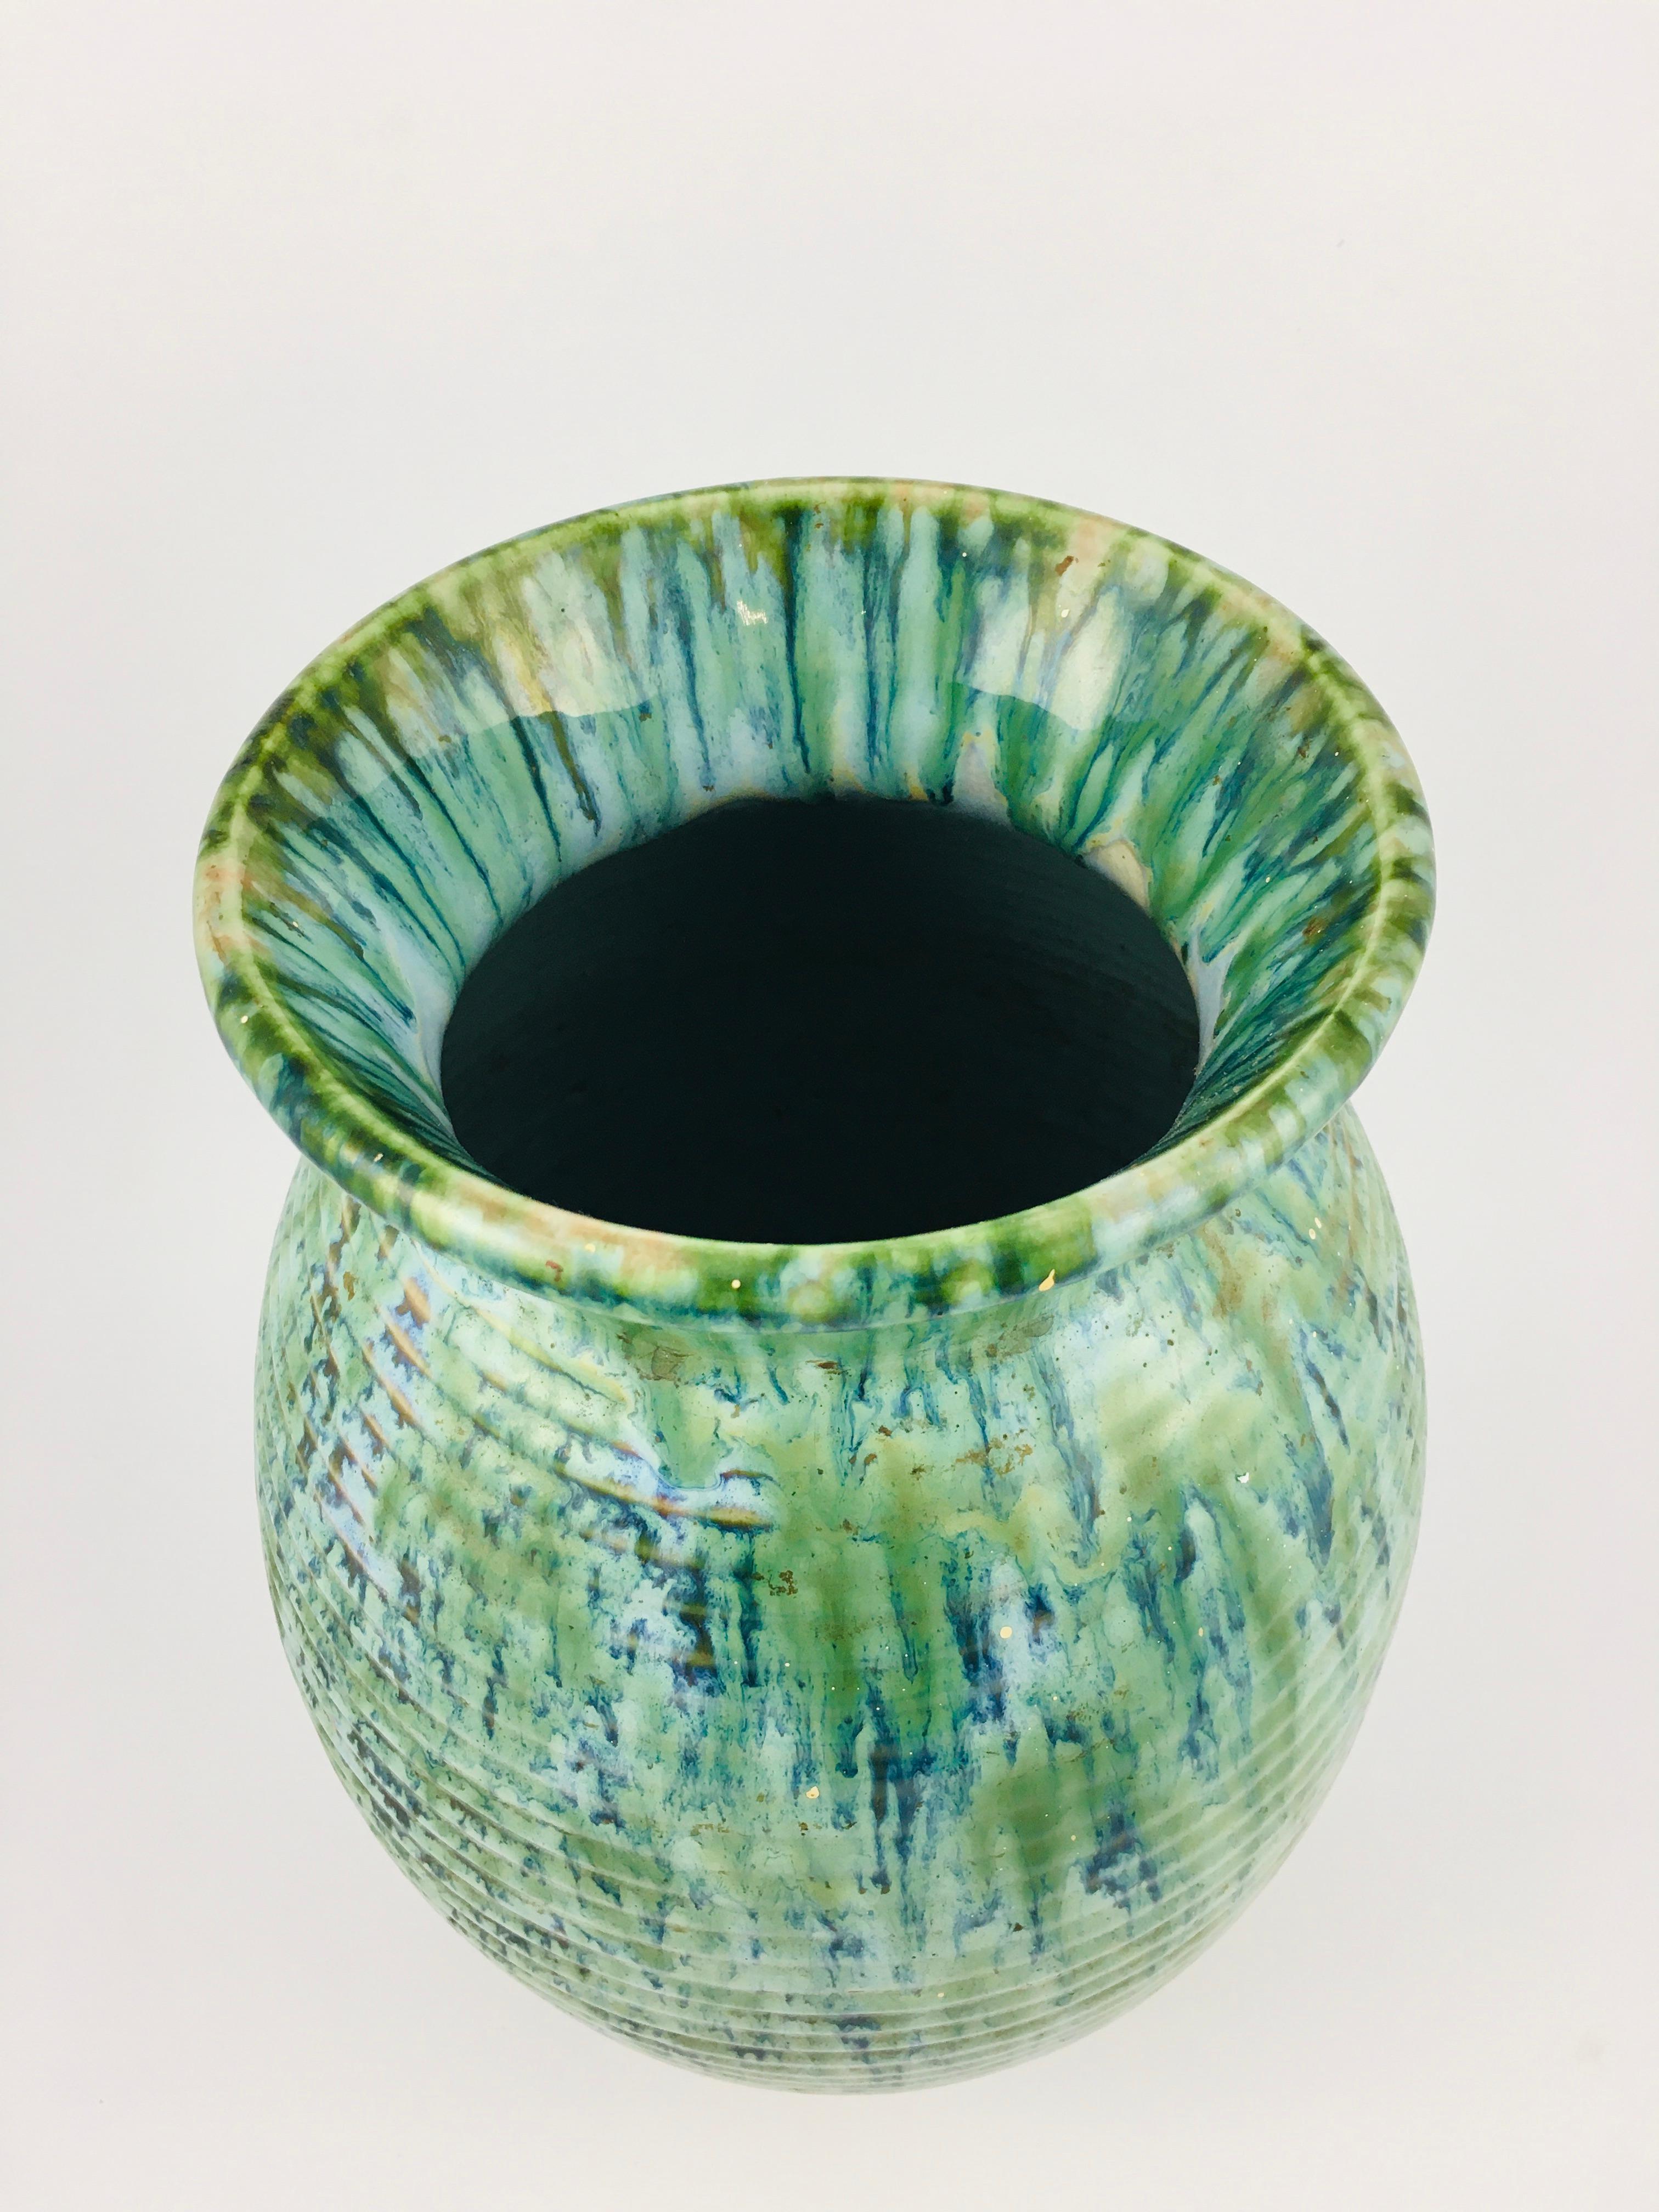 Large pyrogranite vase by Zsolnay, with a special blue and green fused glaze. The wall of a mid-century ceramic urn is ribbed, with glaze applied in several layers with multiple firings. A special green vase, a rare piece from the Zsolnay factory in